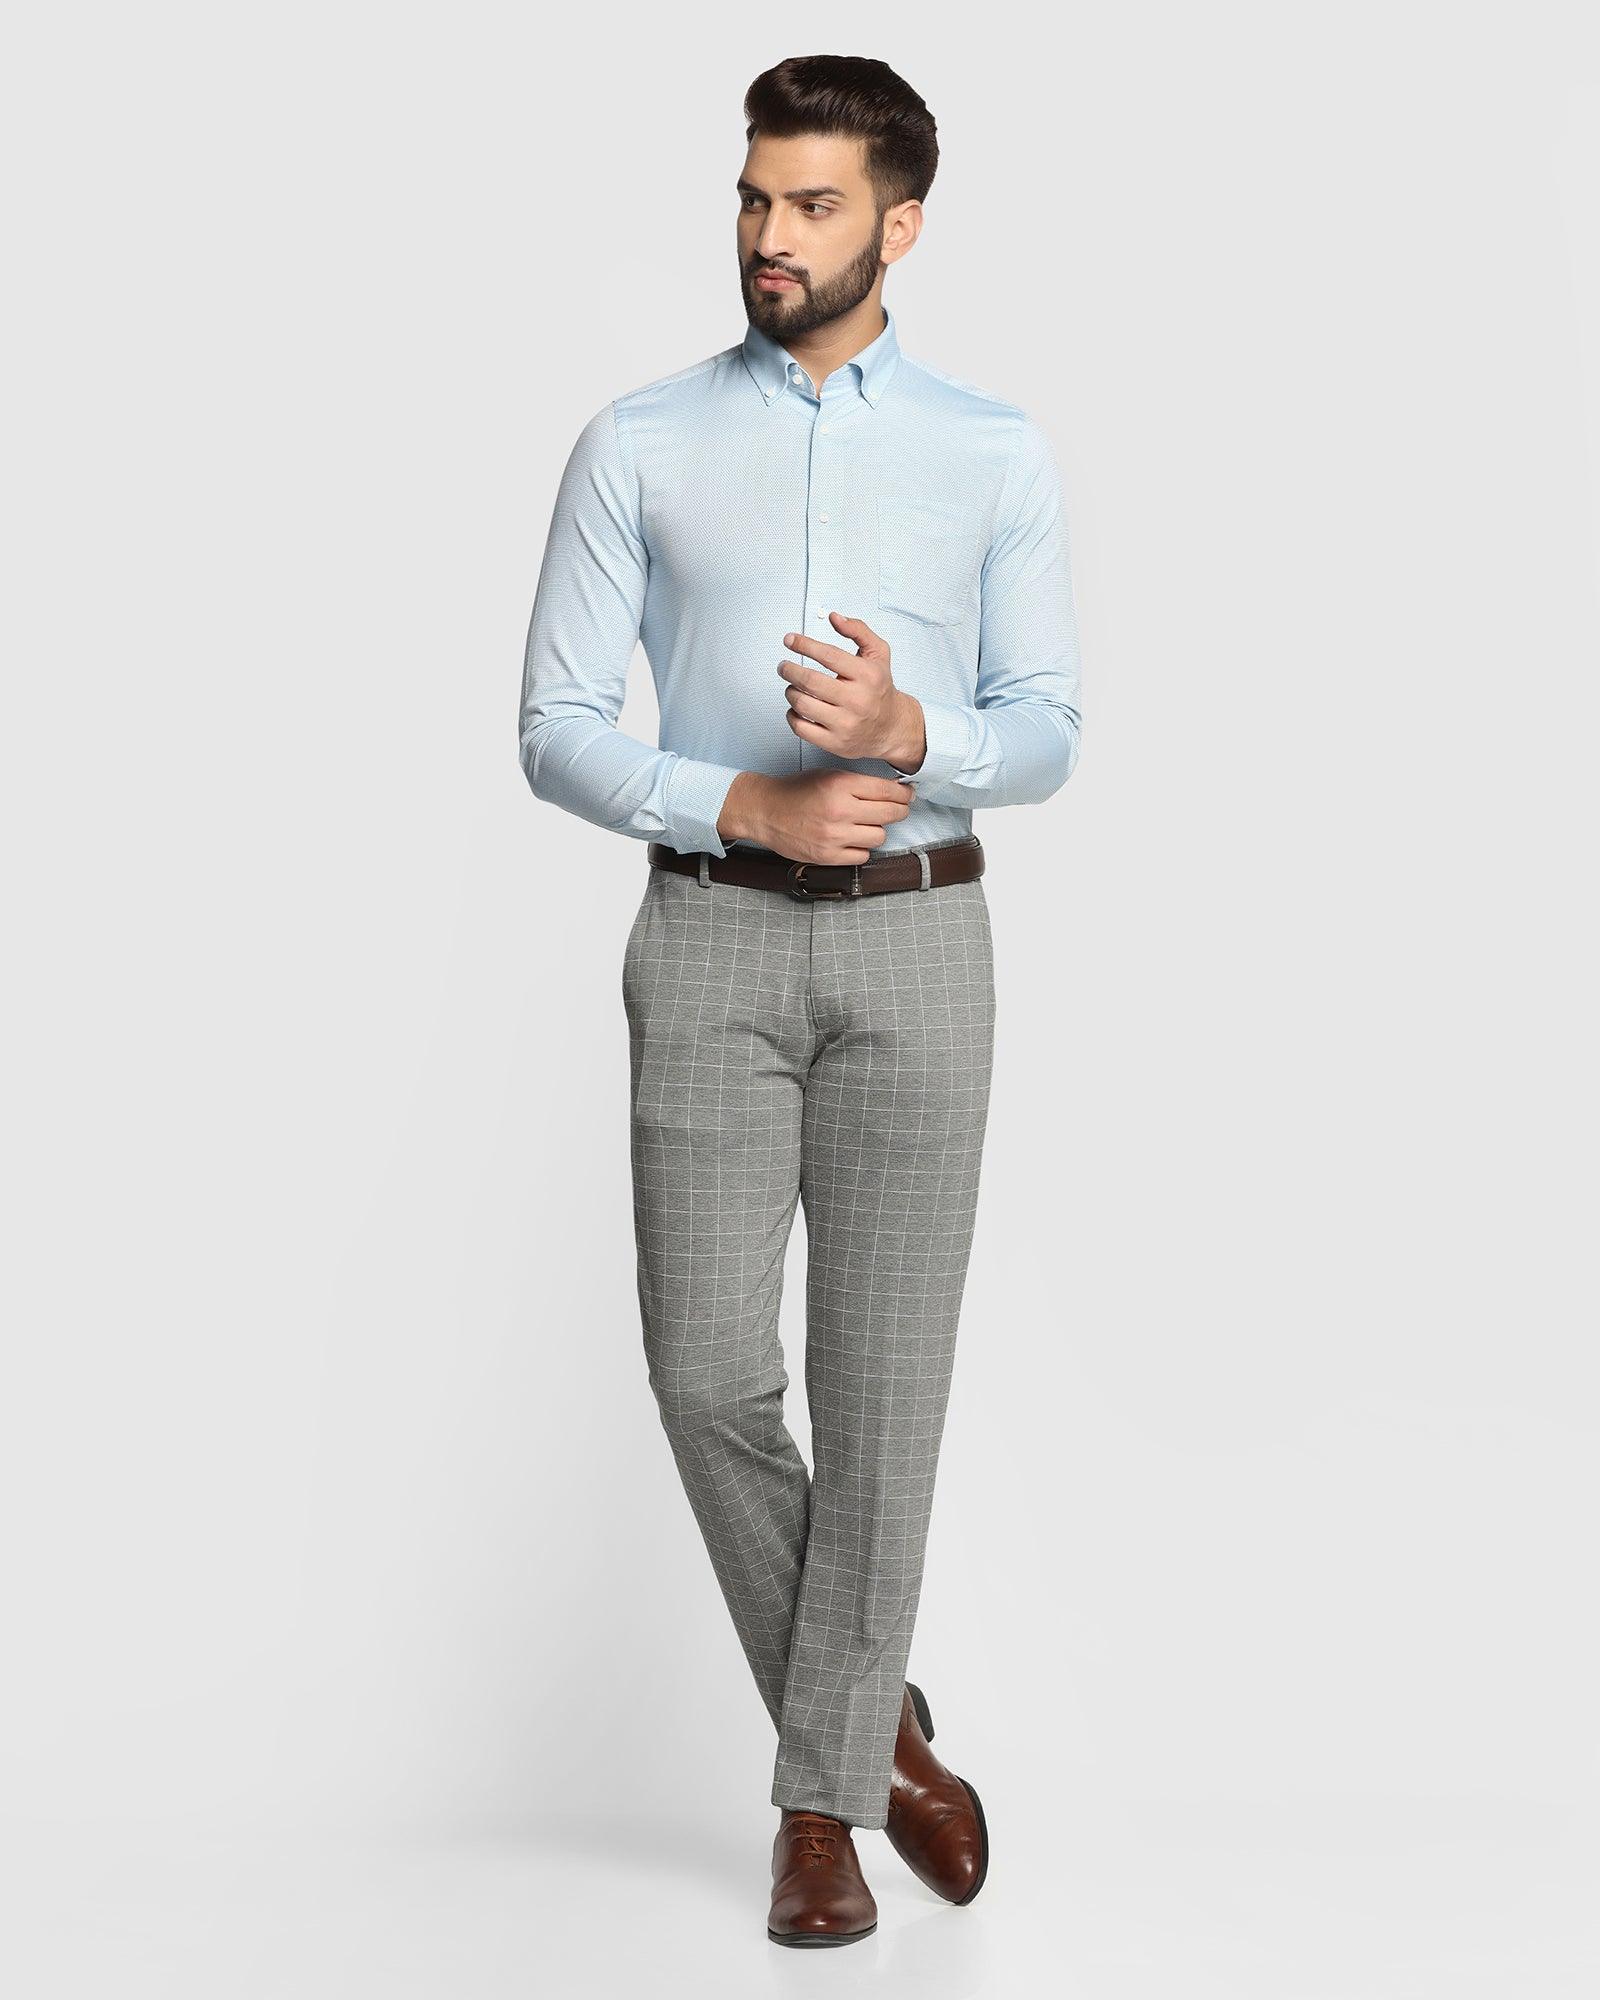 Grey Dress Pants for Men | Men's Fashion | Mens work outfits, Mens outfits,  Mens casual dress